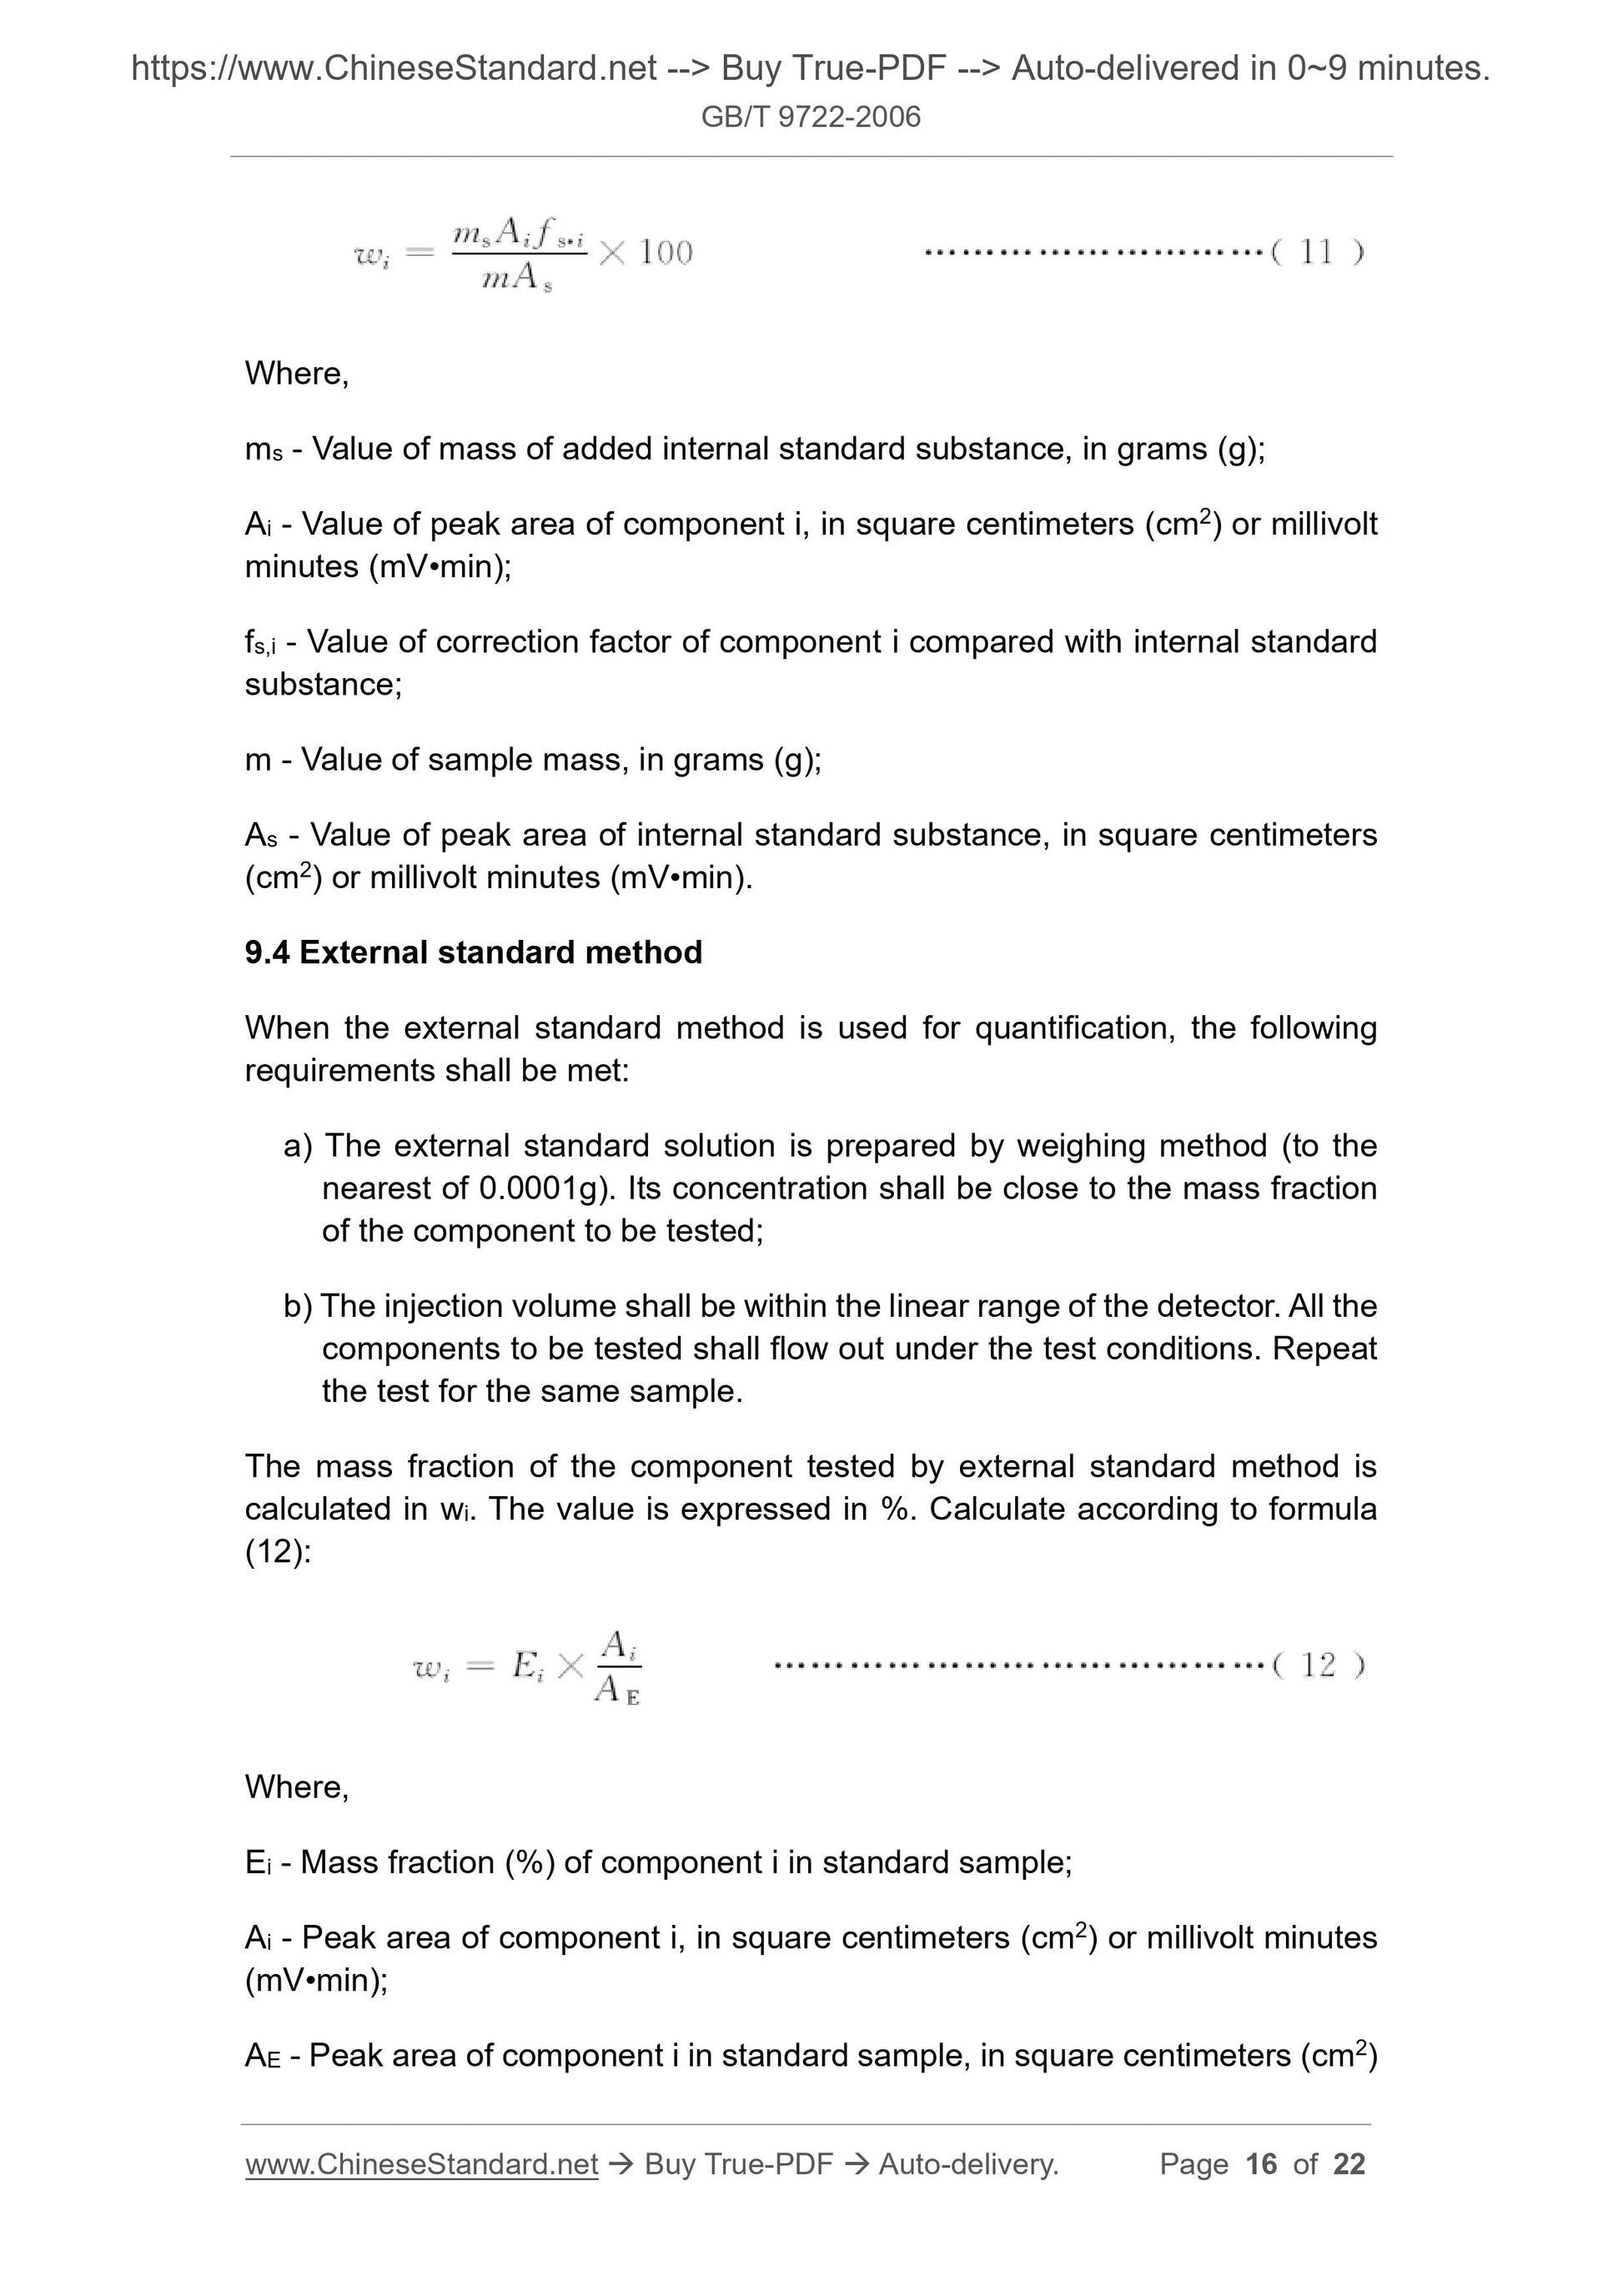 GB/T 9722-2006 Page 8